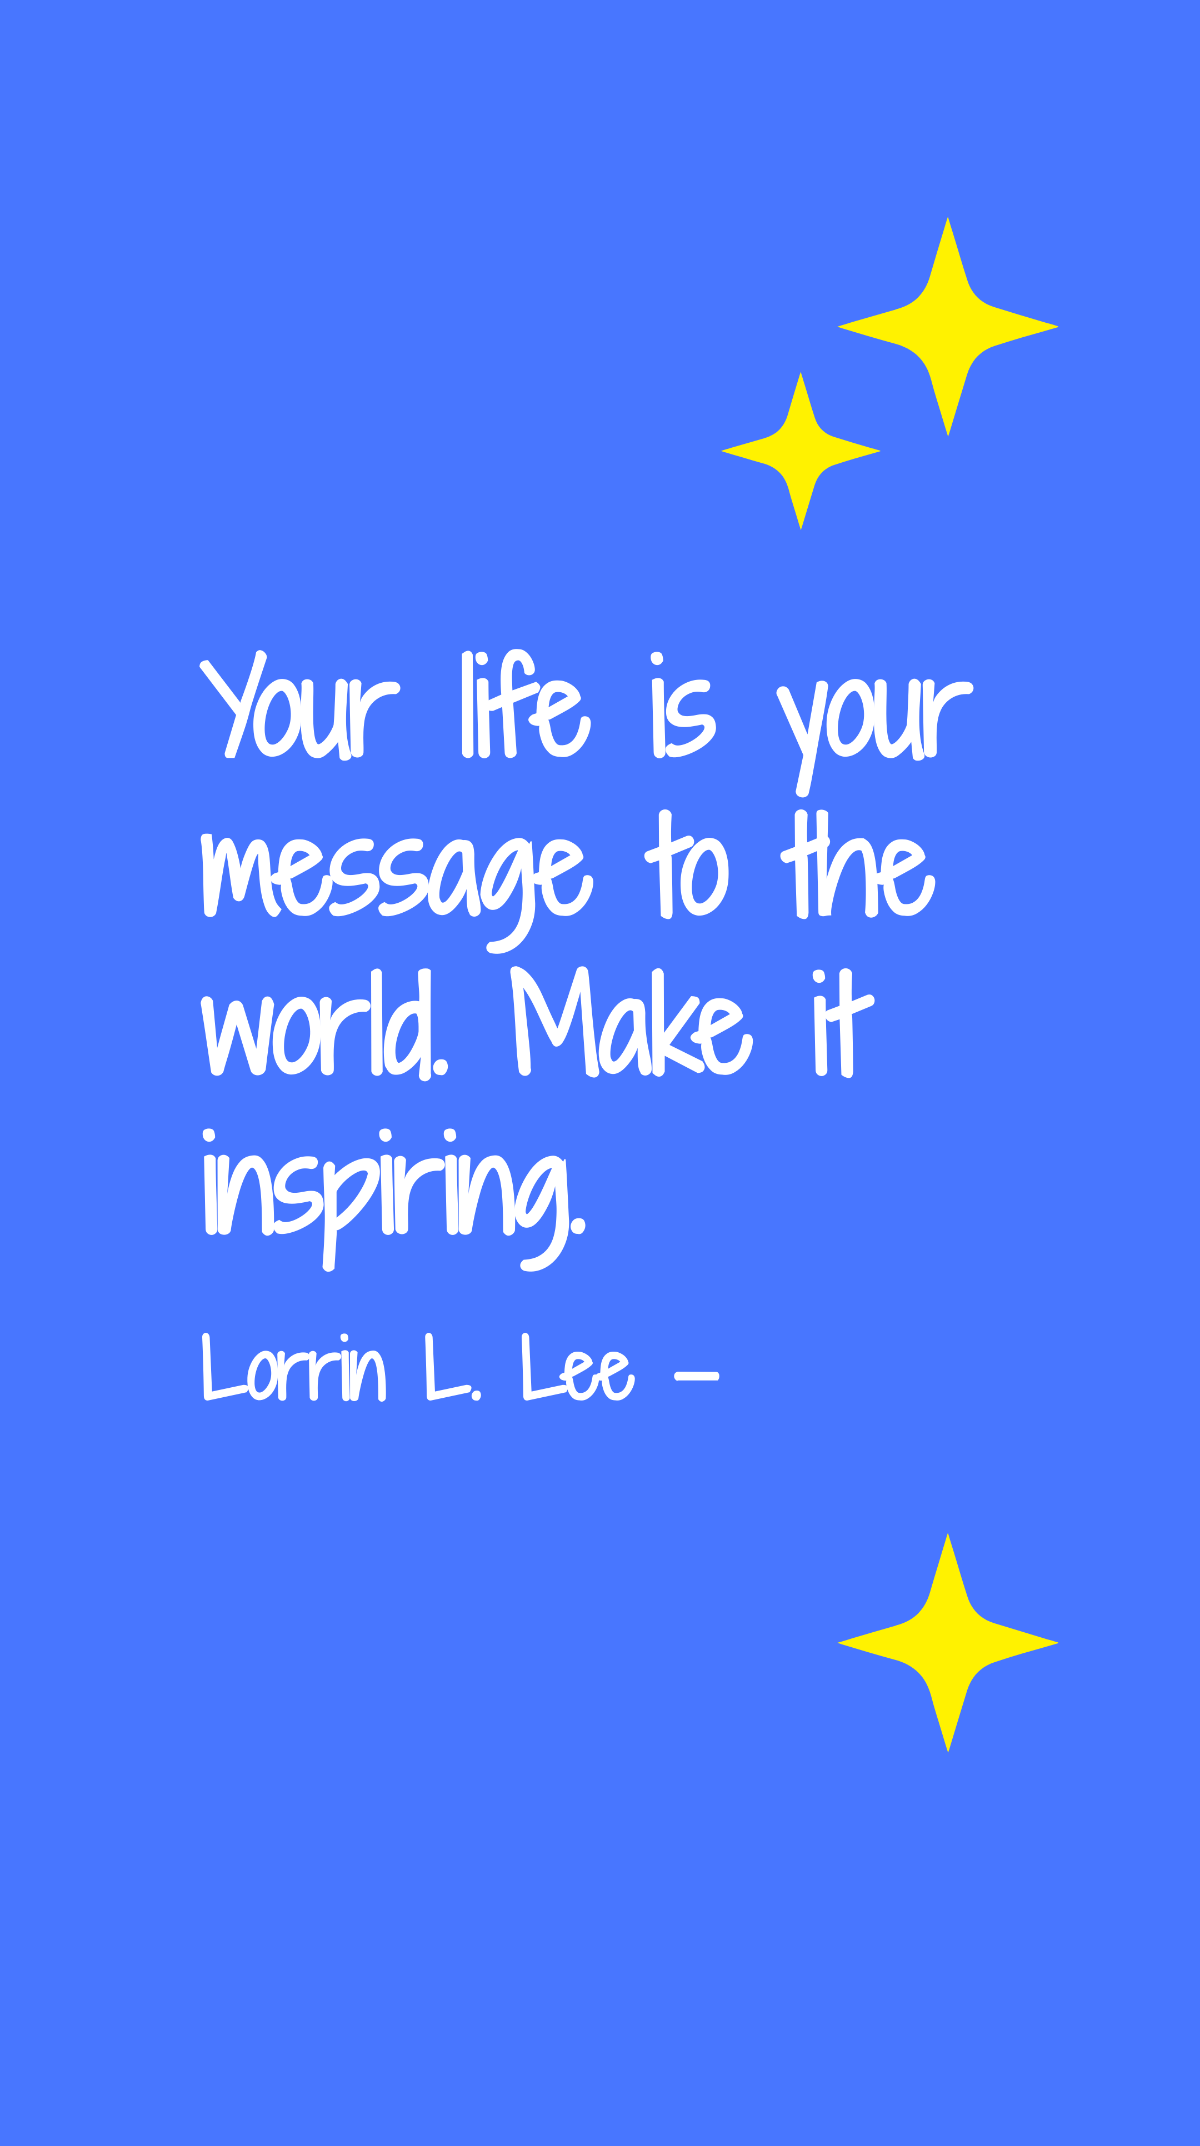 Lorrin L. Lee - Your life is your message to the world. Make it inspiring. Template